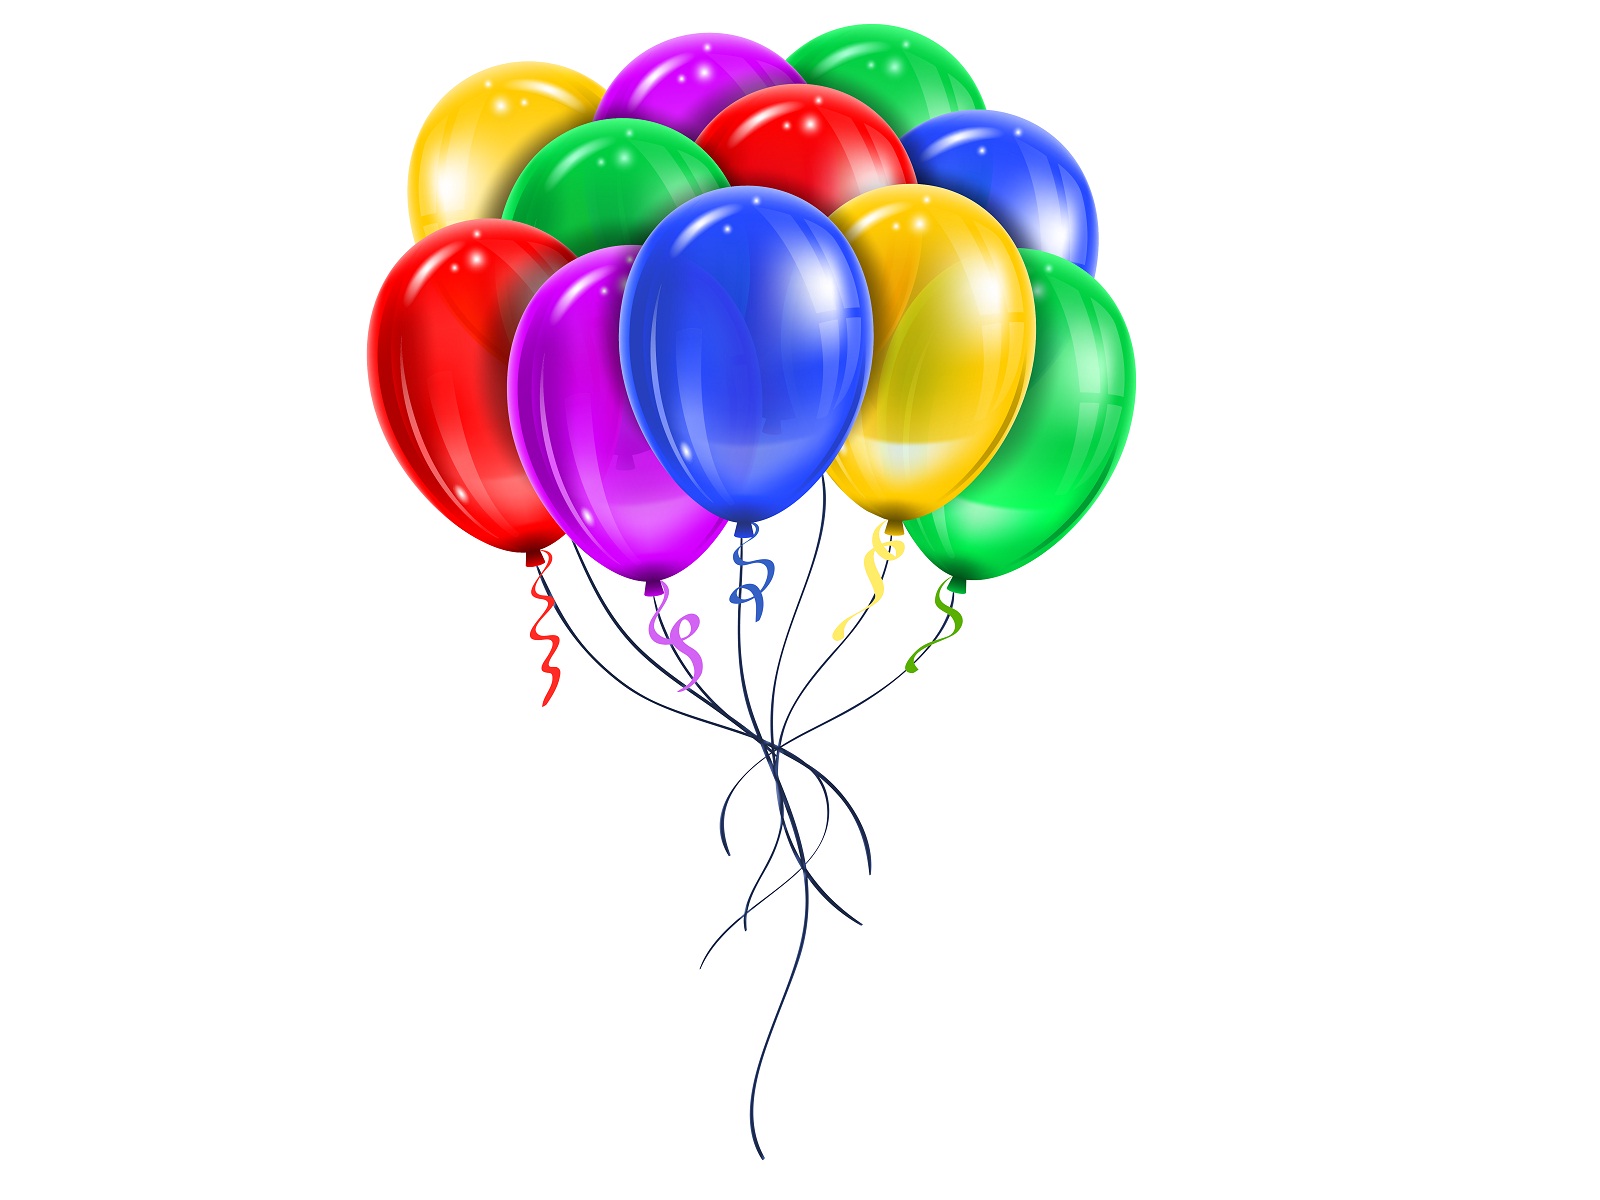 Happy birthday wishes colorful balloons | HD Wallpapers Rocks